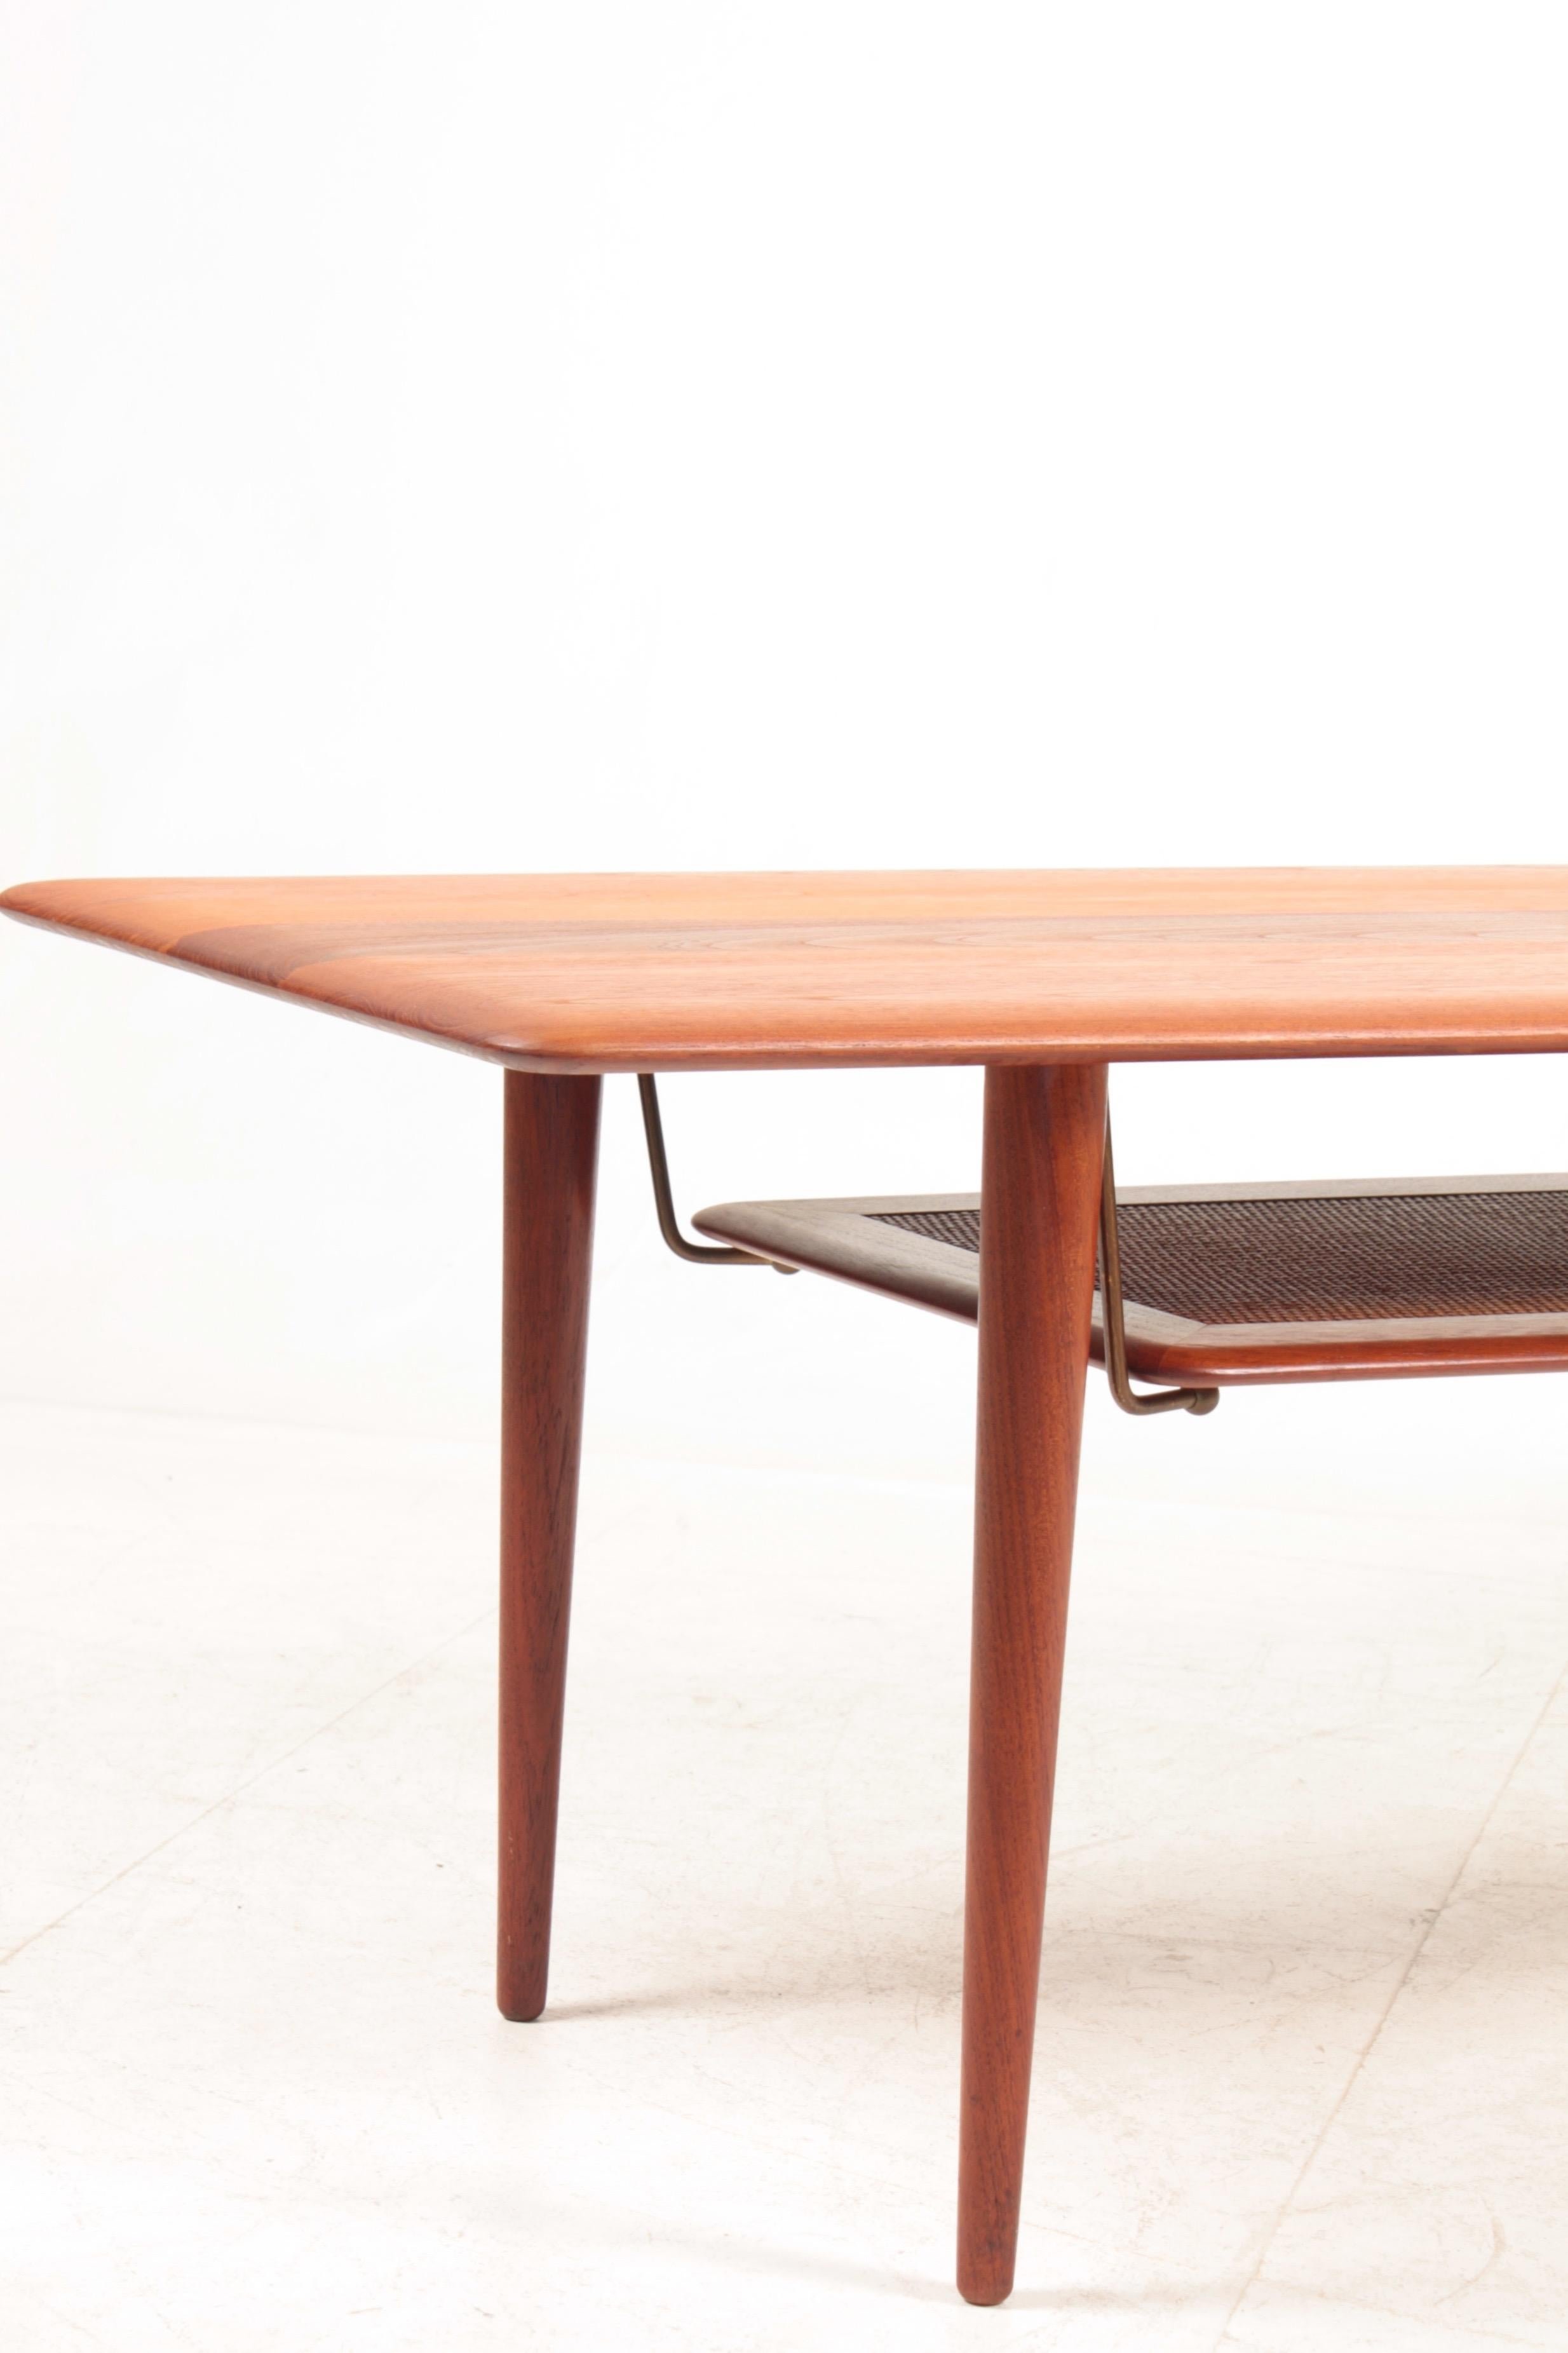 Mid-20th Century Midcentury Low Table in Solid Teak and Cane by Hvidt & Mølgaard, Made in Denmark For Sale